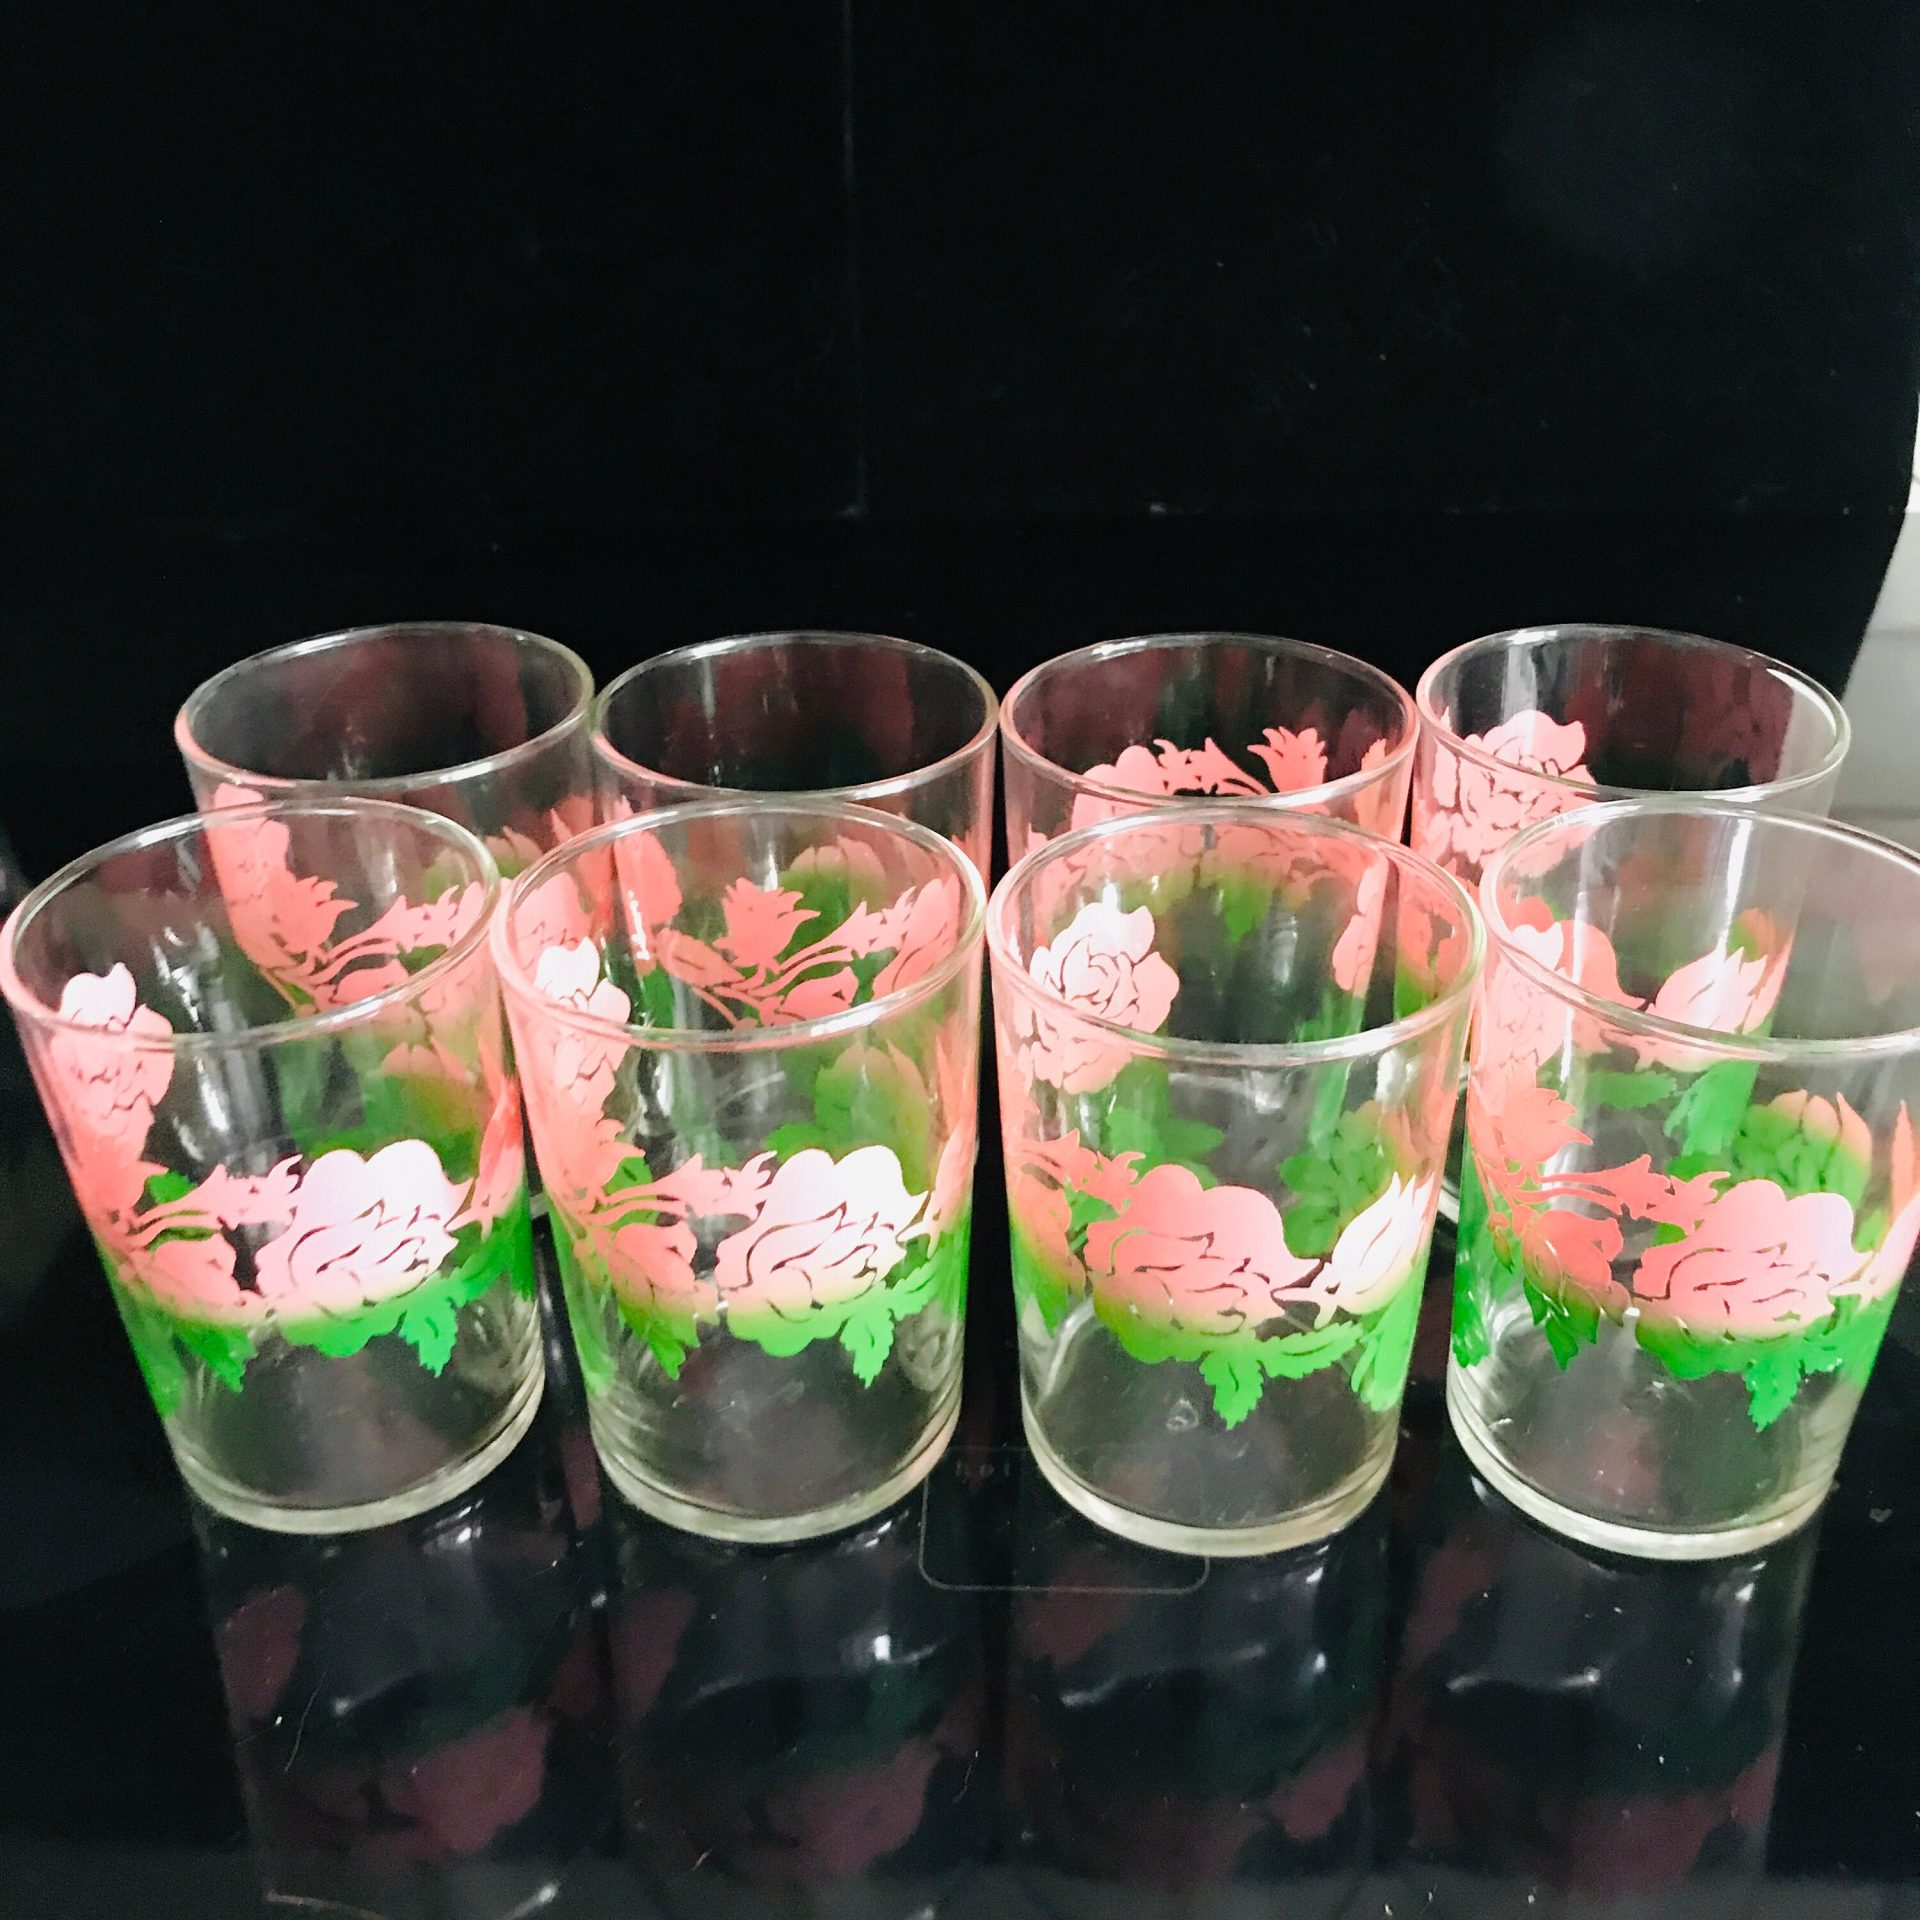 https://www.truevintageantiques.com/wp-content/uploads/2022/05/vintage-juice-glasses-8-retro-kitchen-pink-and-green-mod-iced-tea-collectible-display-water-glasses-farmhouse-retro-home-6291722a3-scaled.jpg